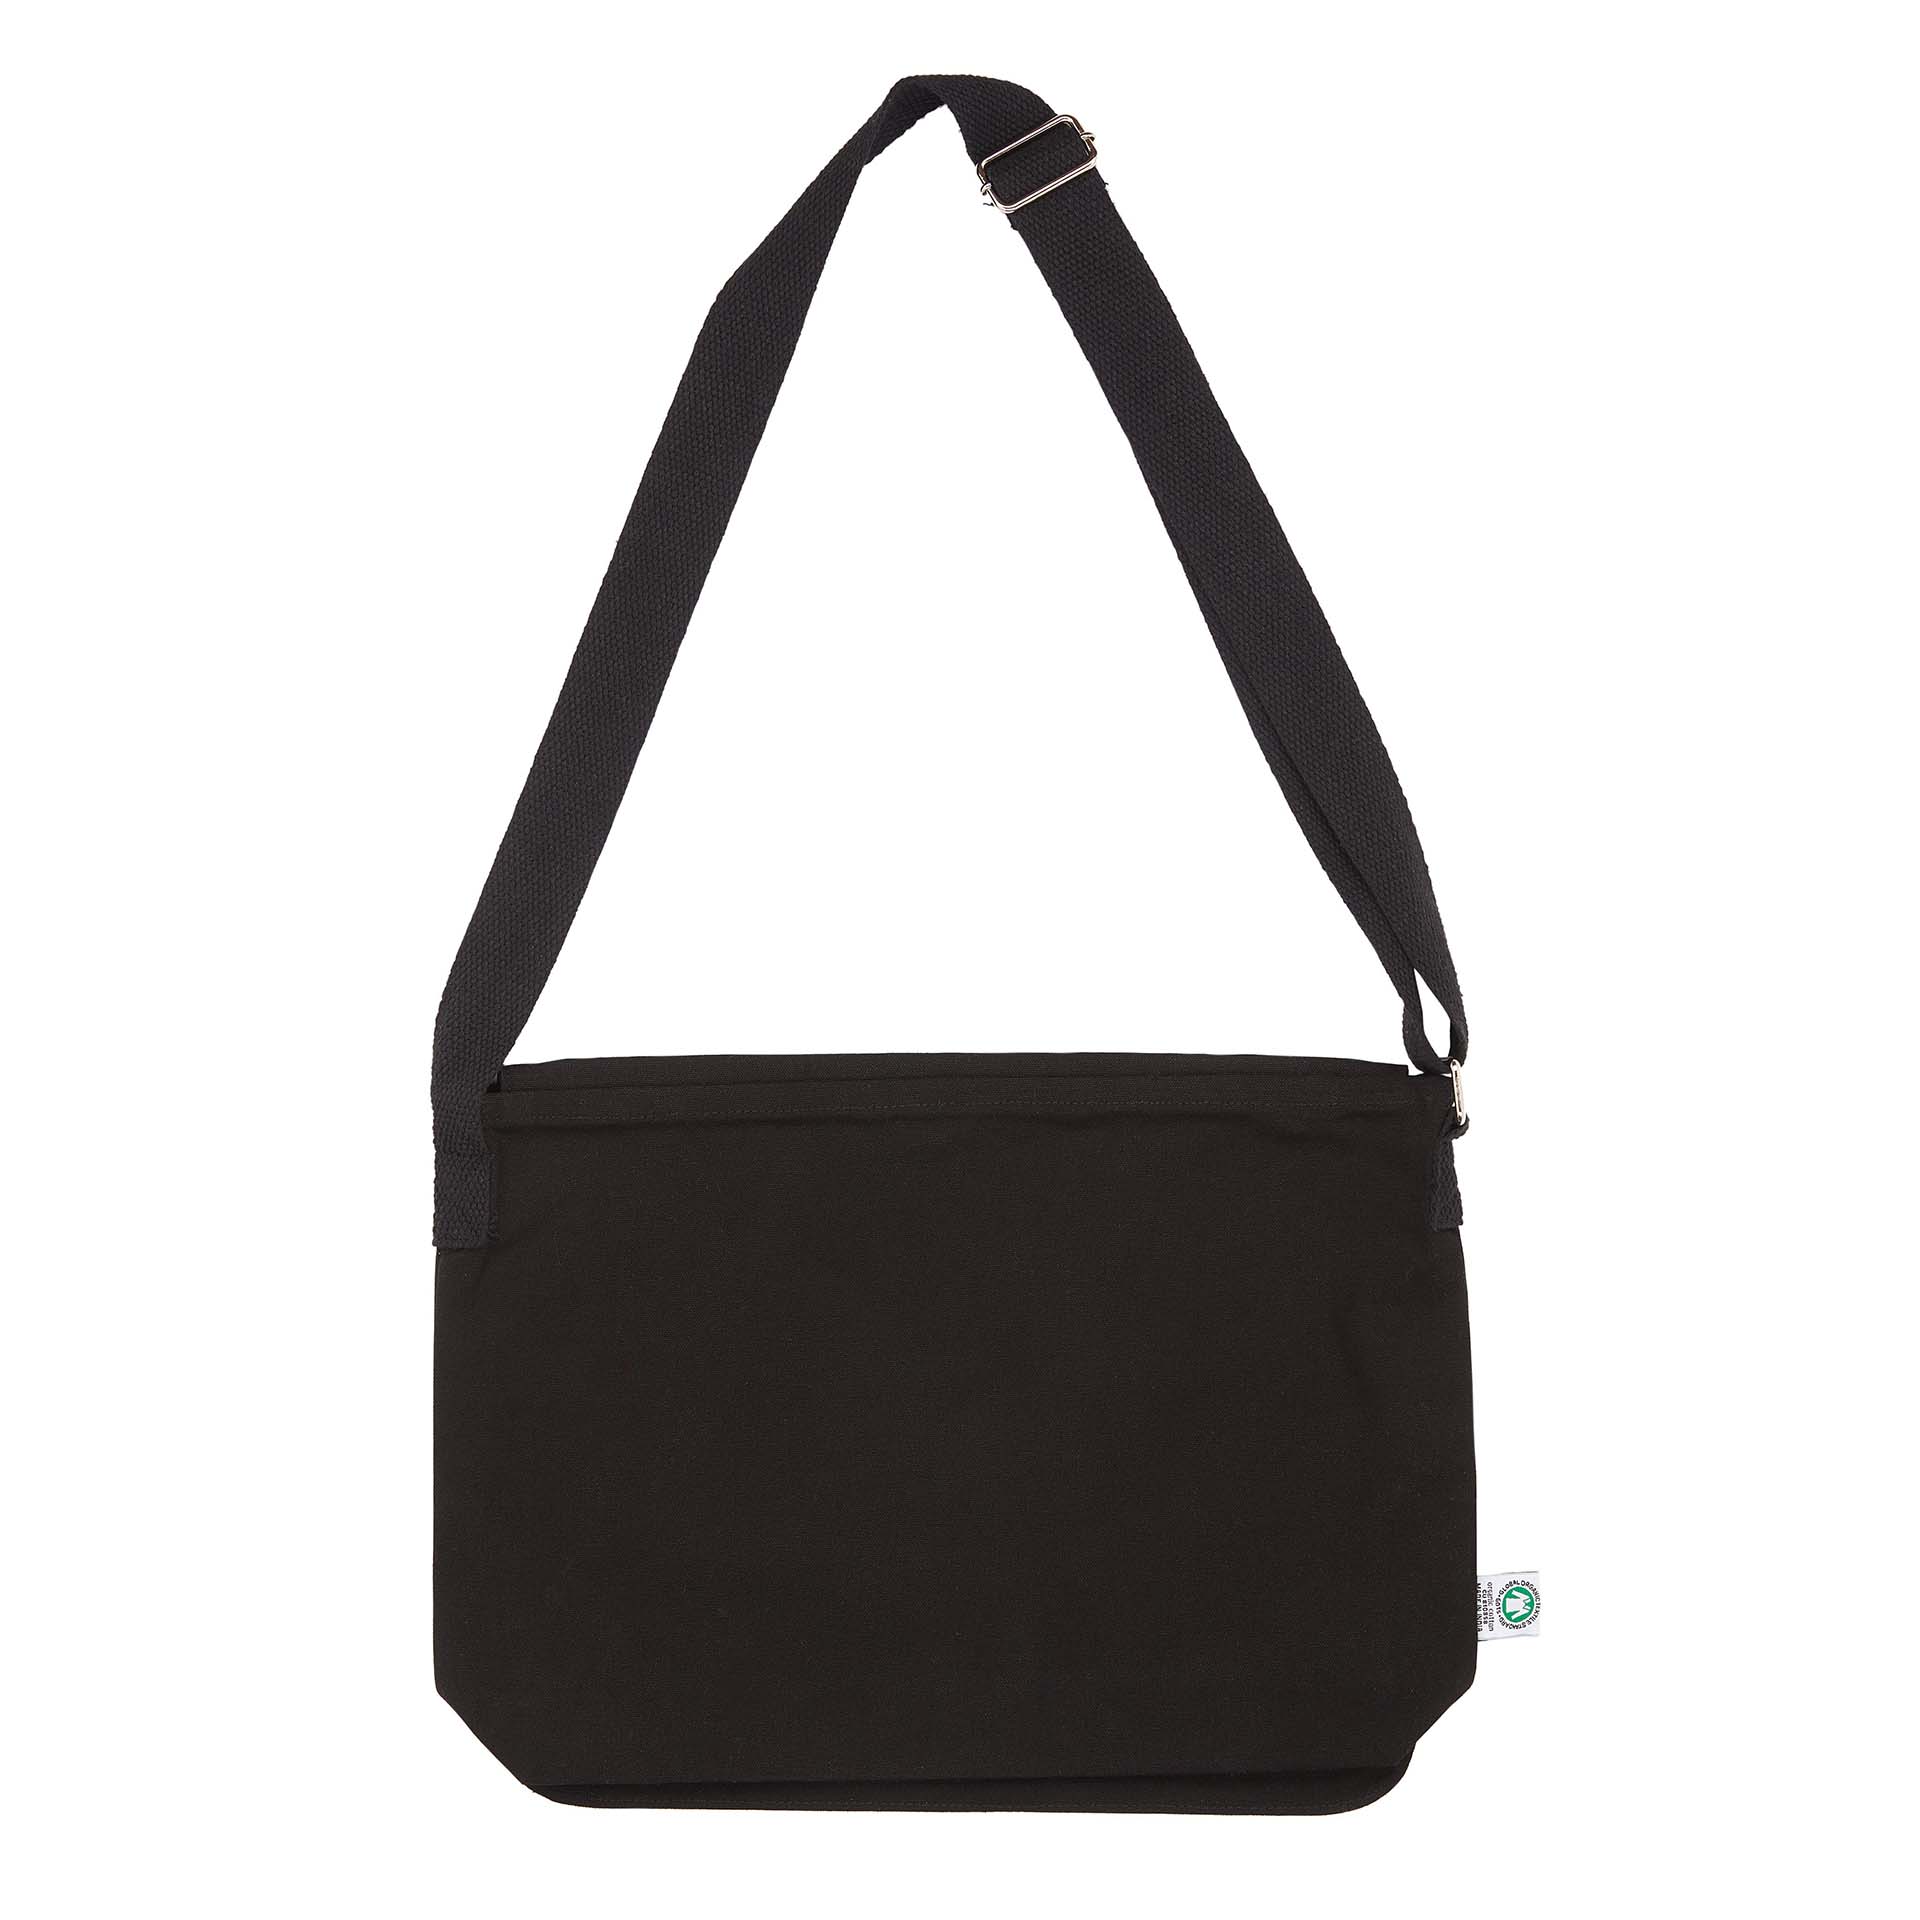 The Green & Good Canterbury Messenger Bag is made from Fairtrade & Organic cotton. It comes in navy or black and has been dyed with AZO-free dyes which are considerably better for the environment. Practical messenger bag for students and for everyday use. Pocket on the outside flap. Ethically produced in India in an audited factory. 12oz / 340gsm Fairtrade & Organic cotton. Black